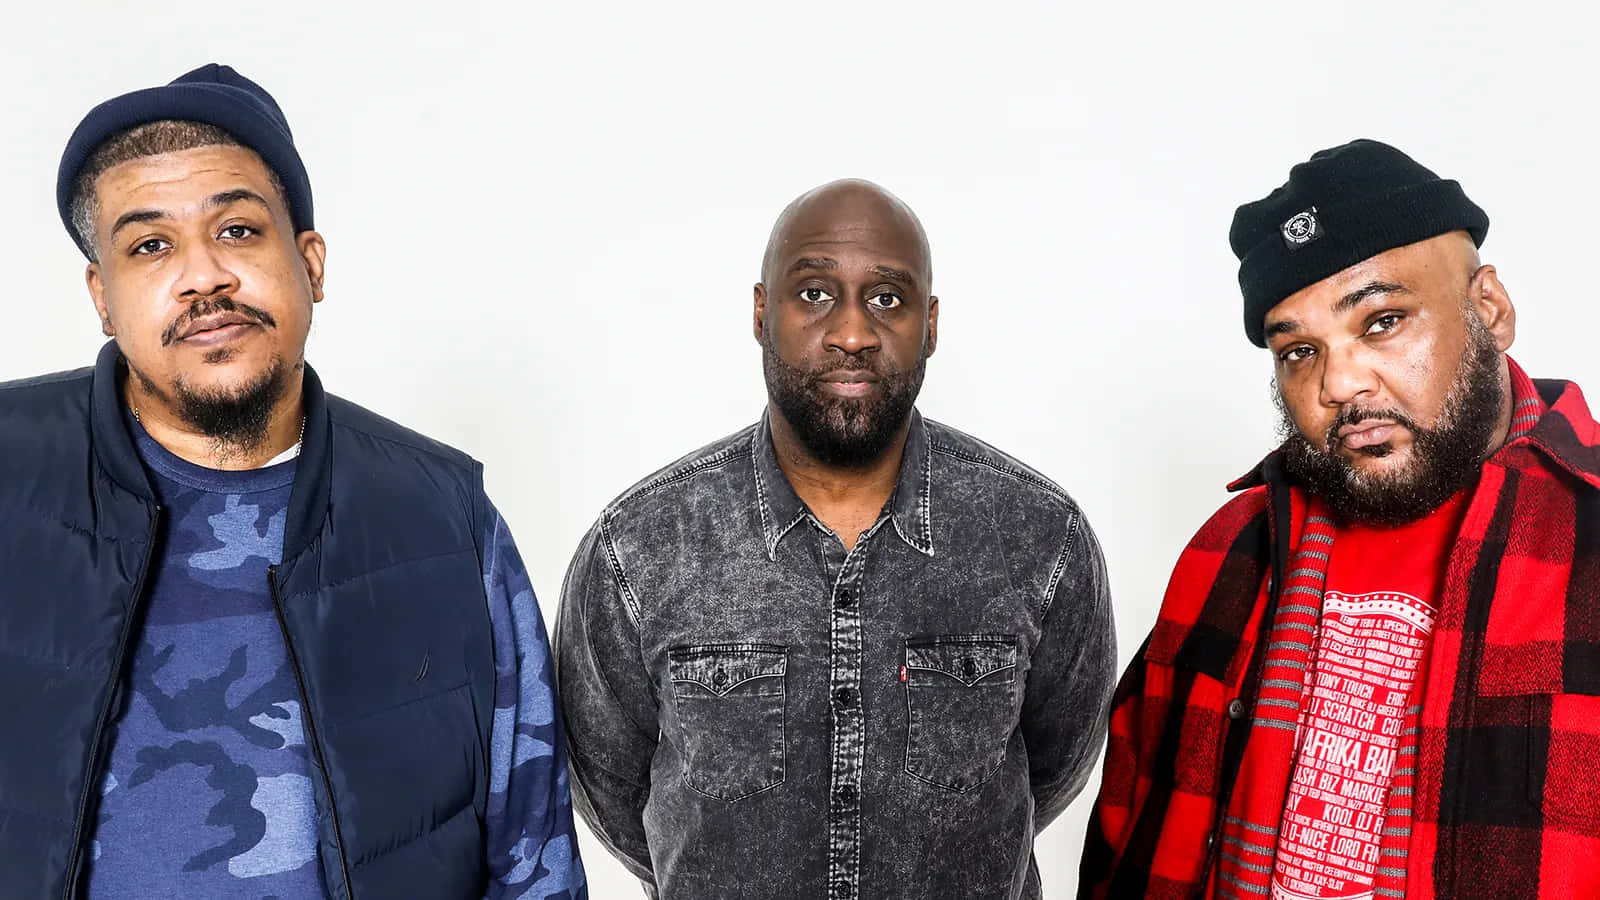 Acclaimed trio De La Soul have been leading the Hip Hop scene since their debut with 3 Feet High and Rising. Wallpaper